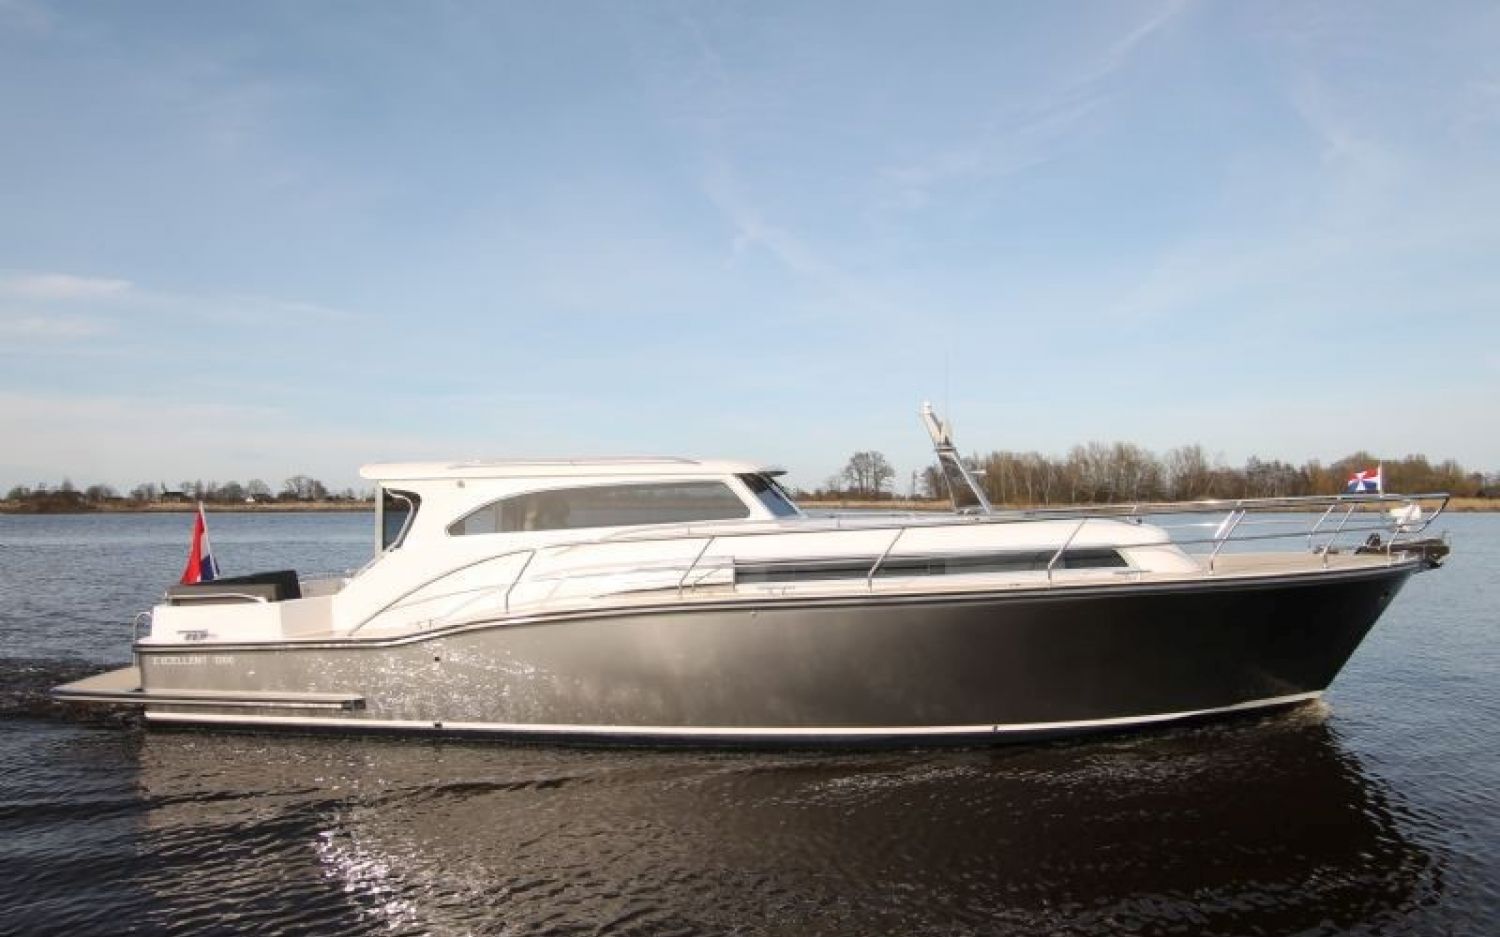 Excellent 1200, Motorjacht for sale by HollandBoat International Yachtbrokers